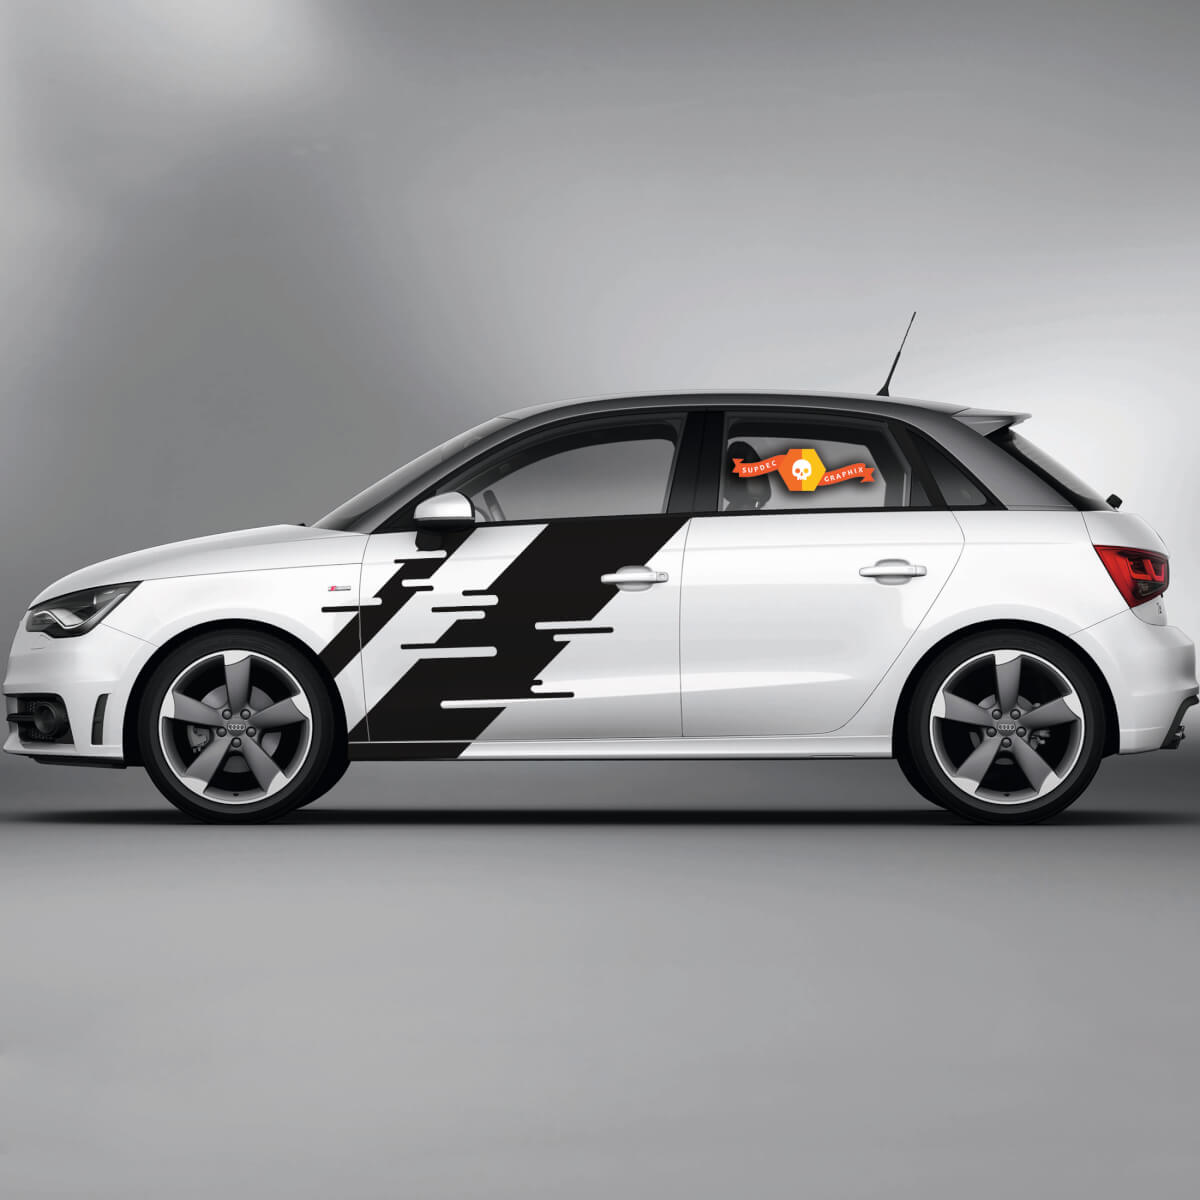 2x Vinyl Decals Graphic Stickers Audi A1 car racing stripes Wide Ribbon 2022